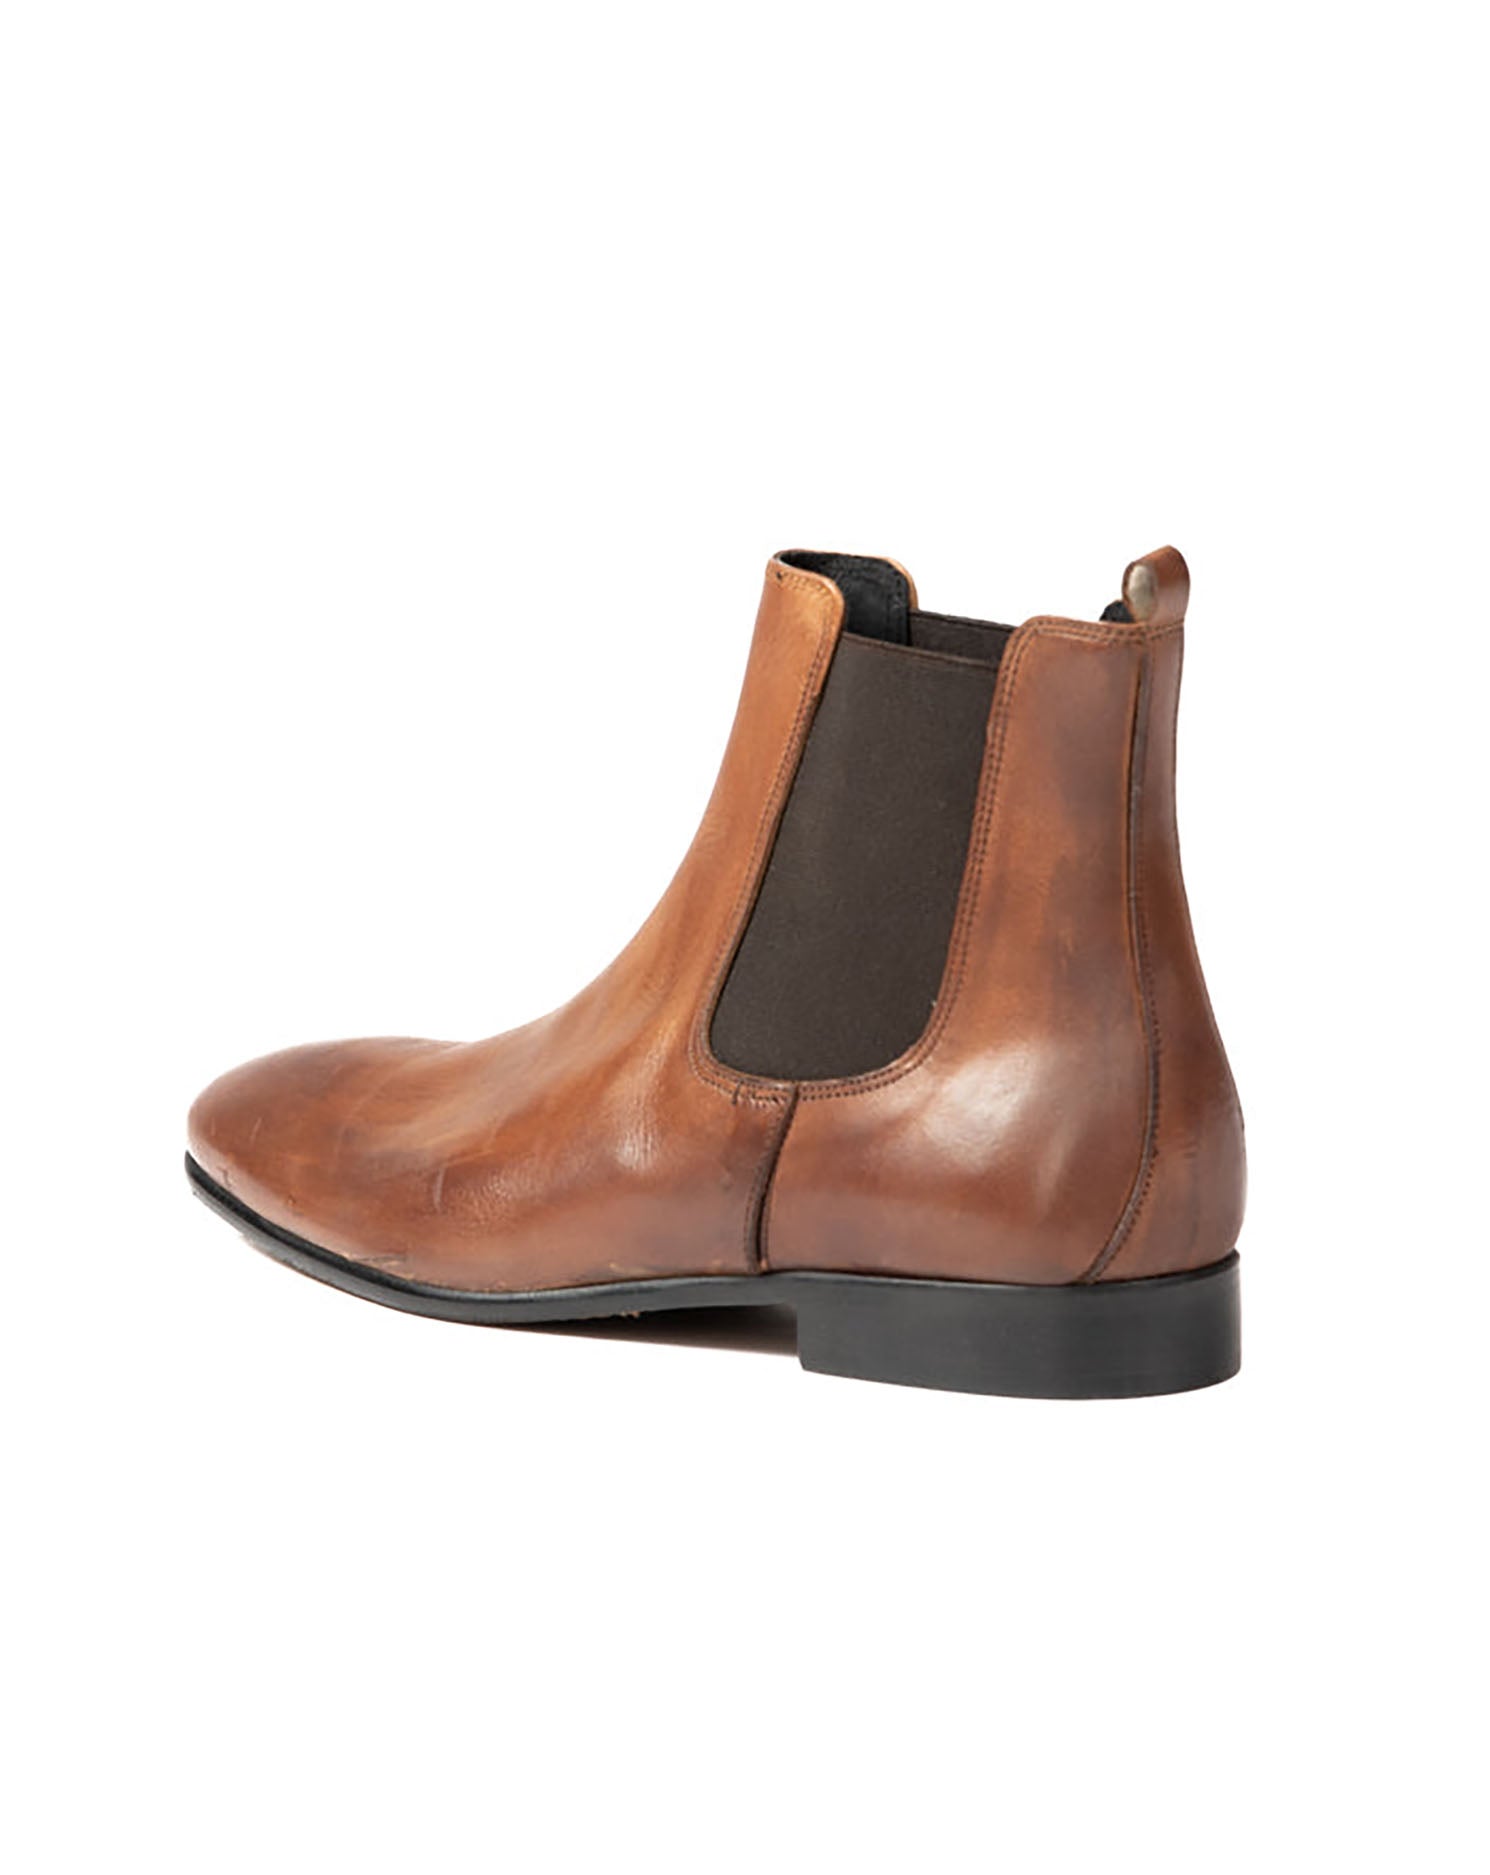 Dre - brown leather chelsea boots